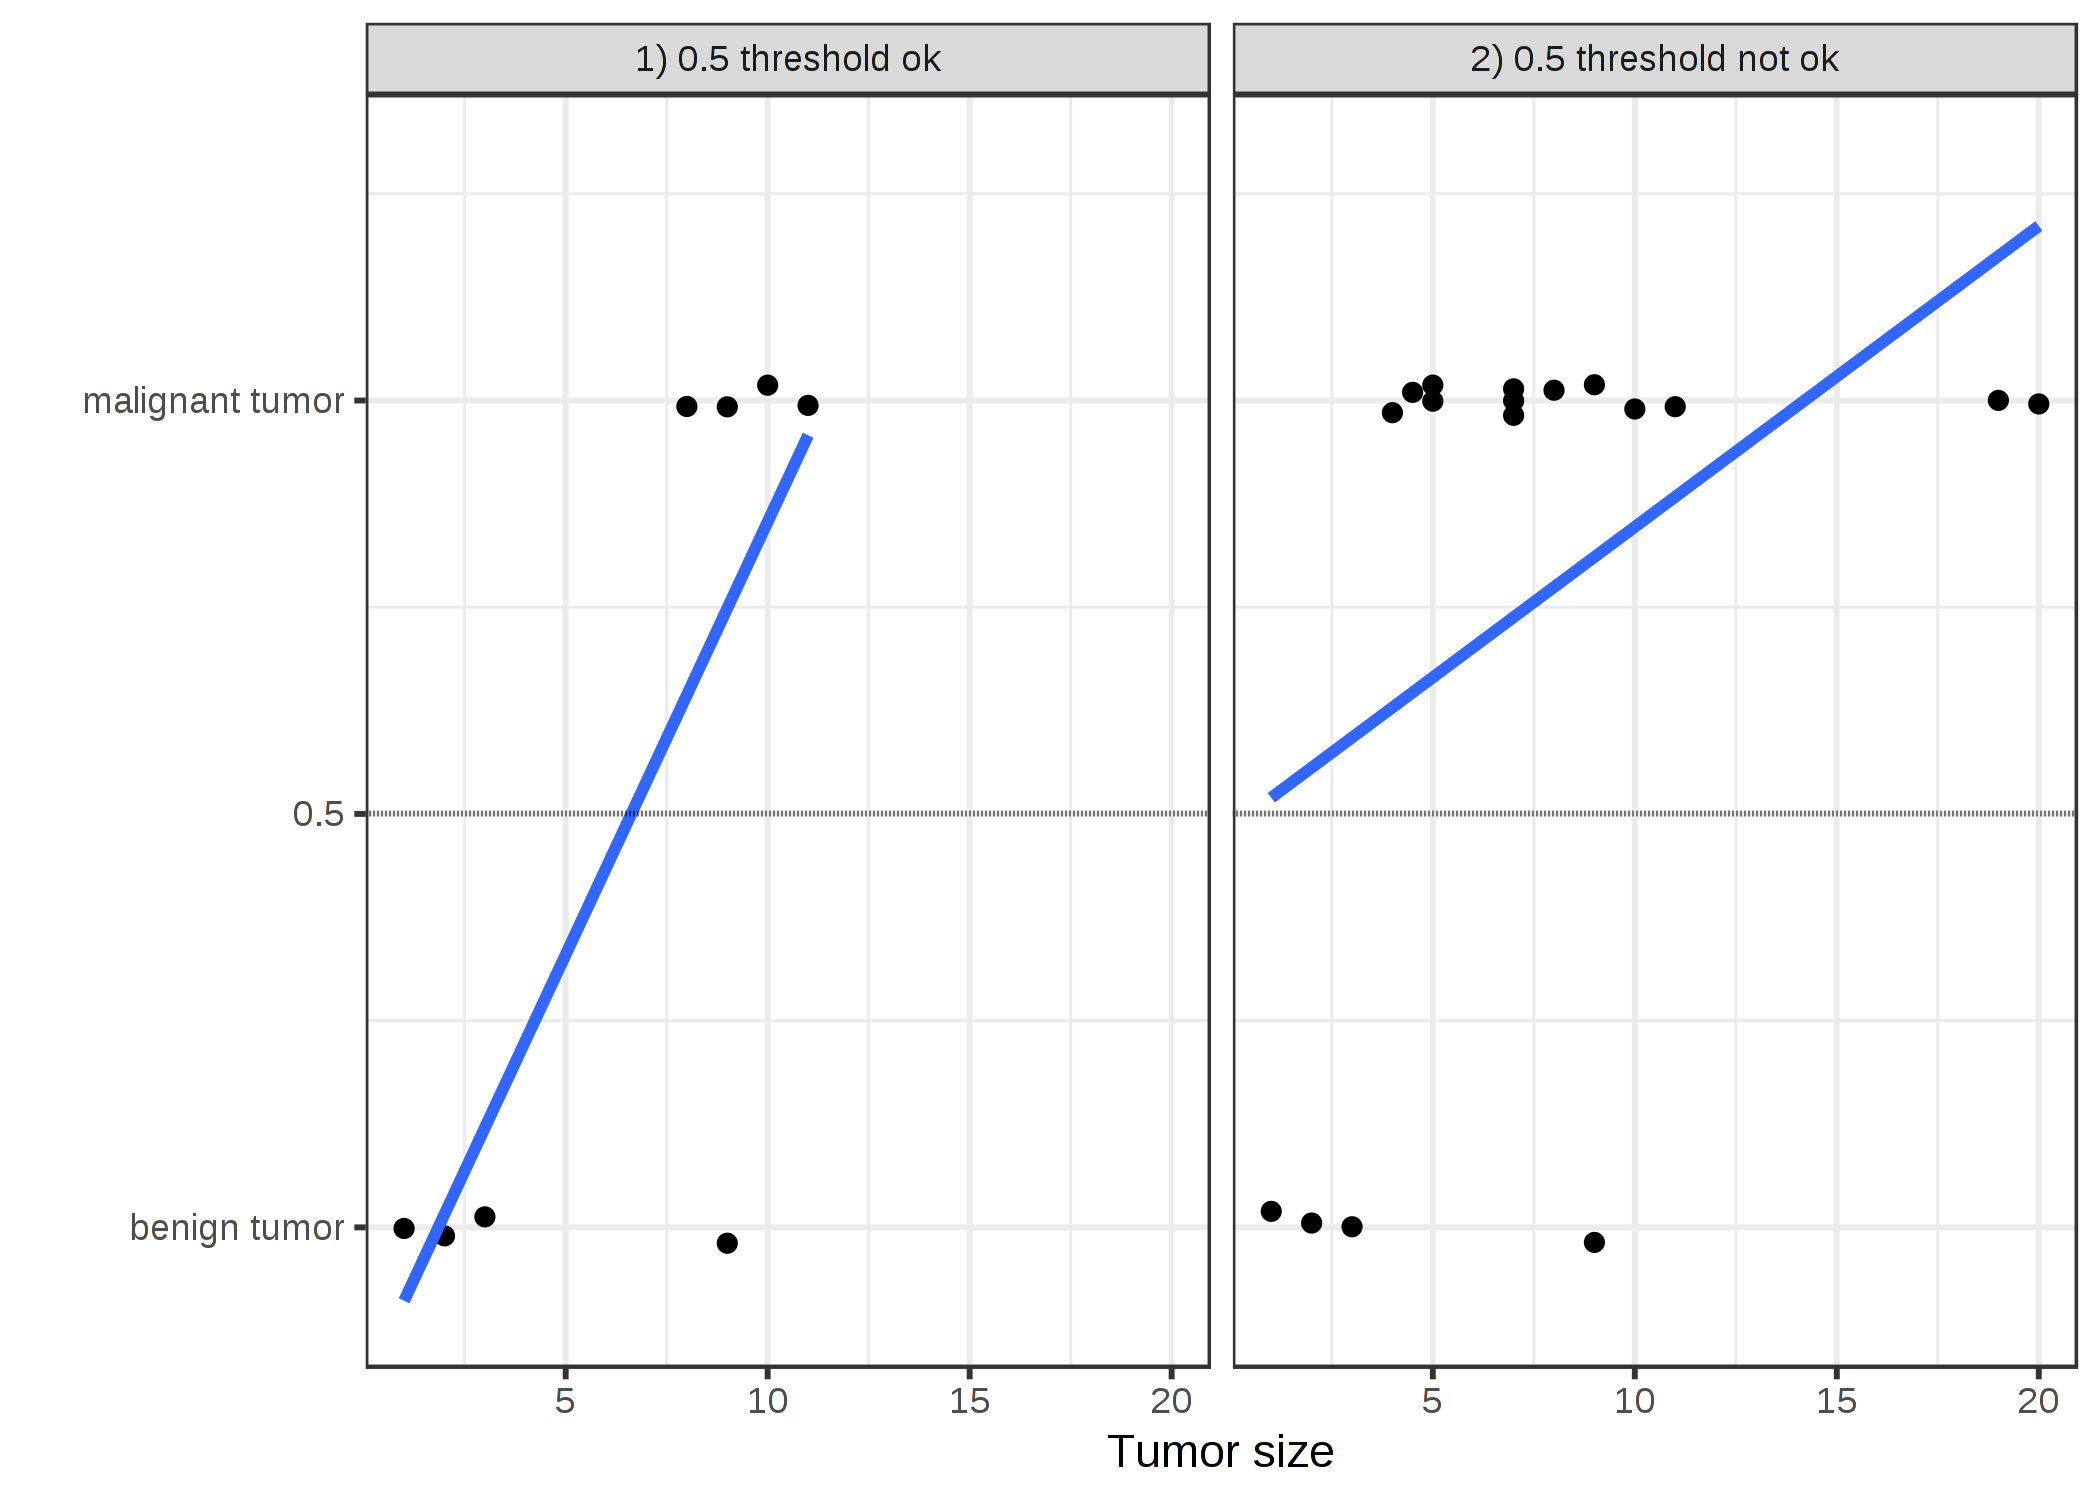 A linear model classifies tumors as malignant (1) or benign (0) given their size. The lines show the prediction of the linear model. For the data on the left, we can use 0.5 as classification threshold. After introducing a few more malignant tumor cases, the regression line shifts and a threshold of 0.5 no longer separates the classes. Points are slightly jittered to reduce over-plotting. 